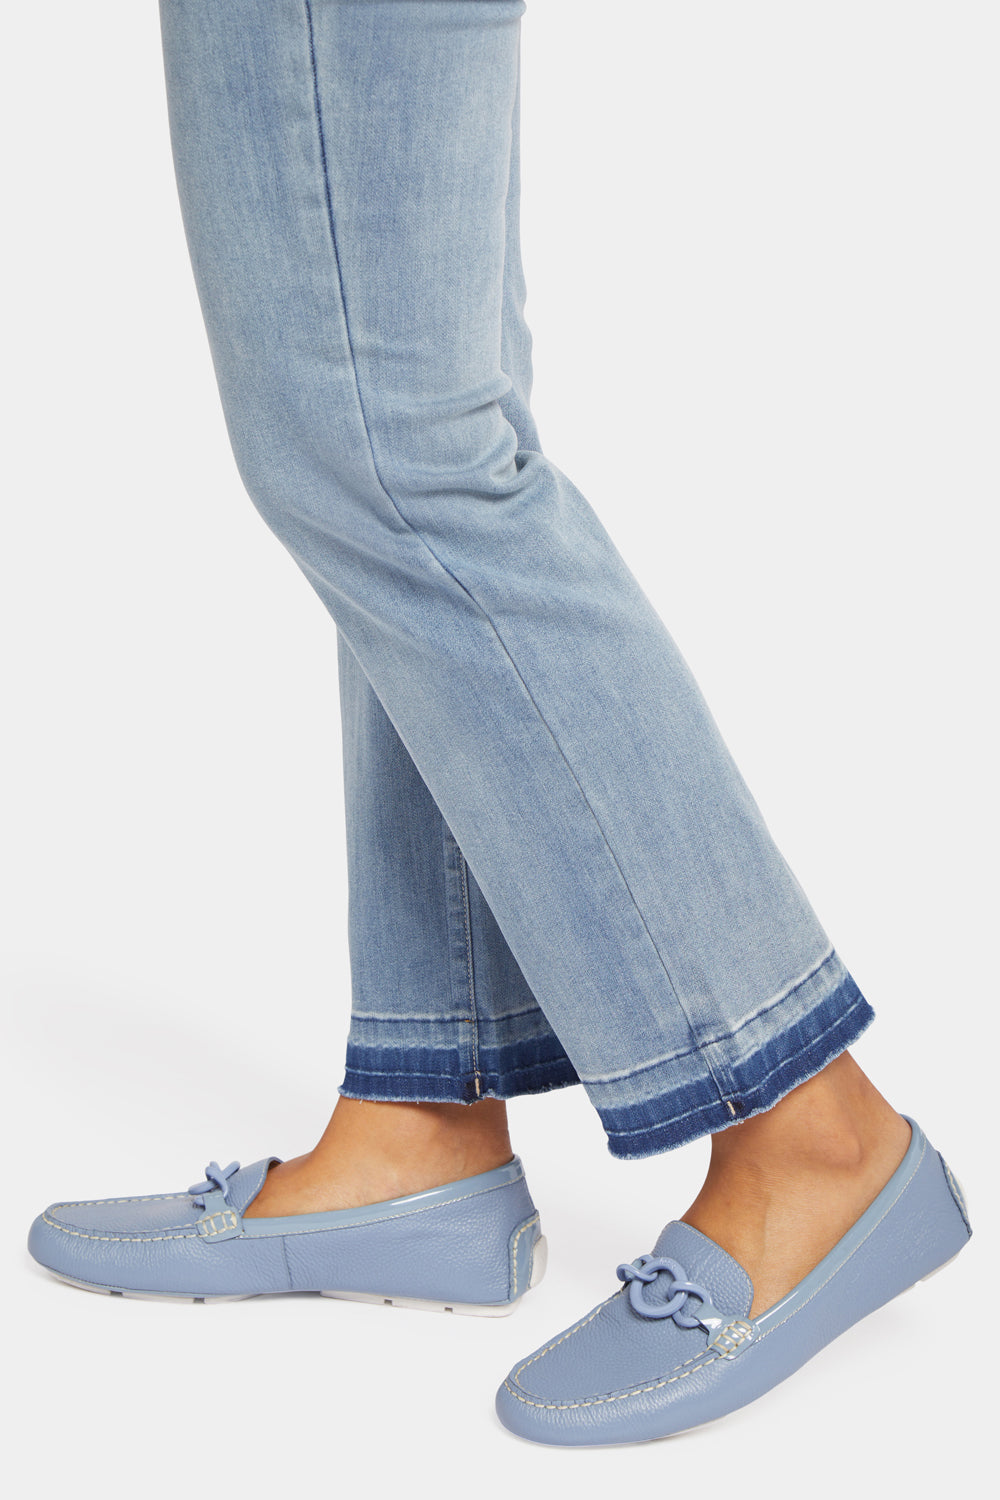 NYDJ Marilyn Straight Ankle Jeans In Sure Stretch® Denim With High Rise And Released Hems - Crystalline